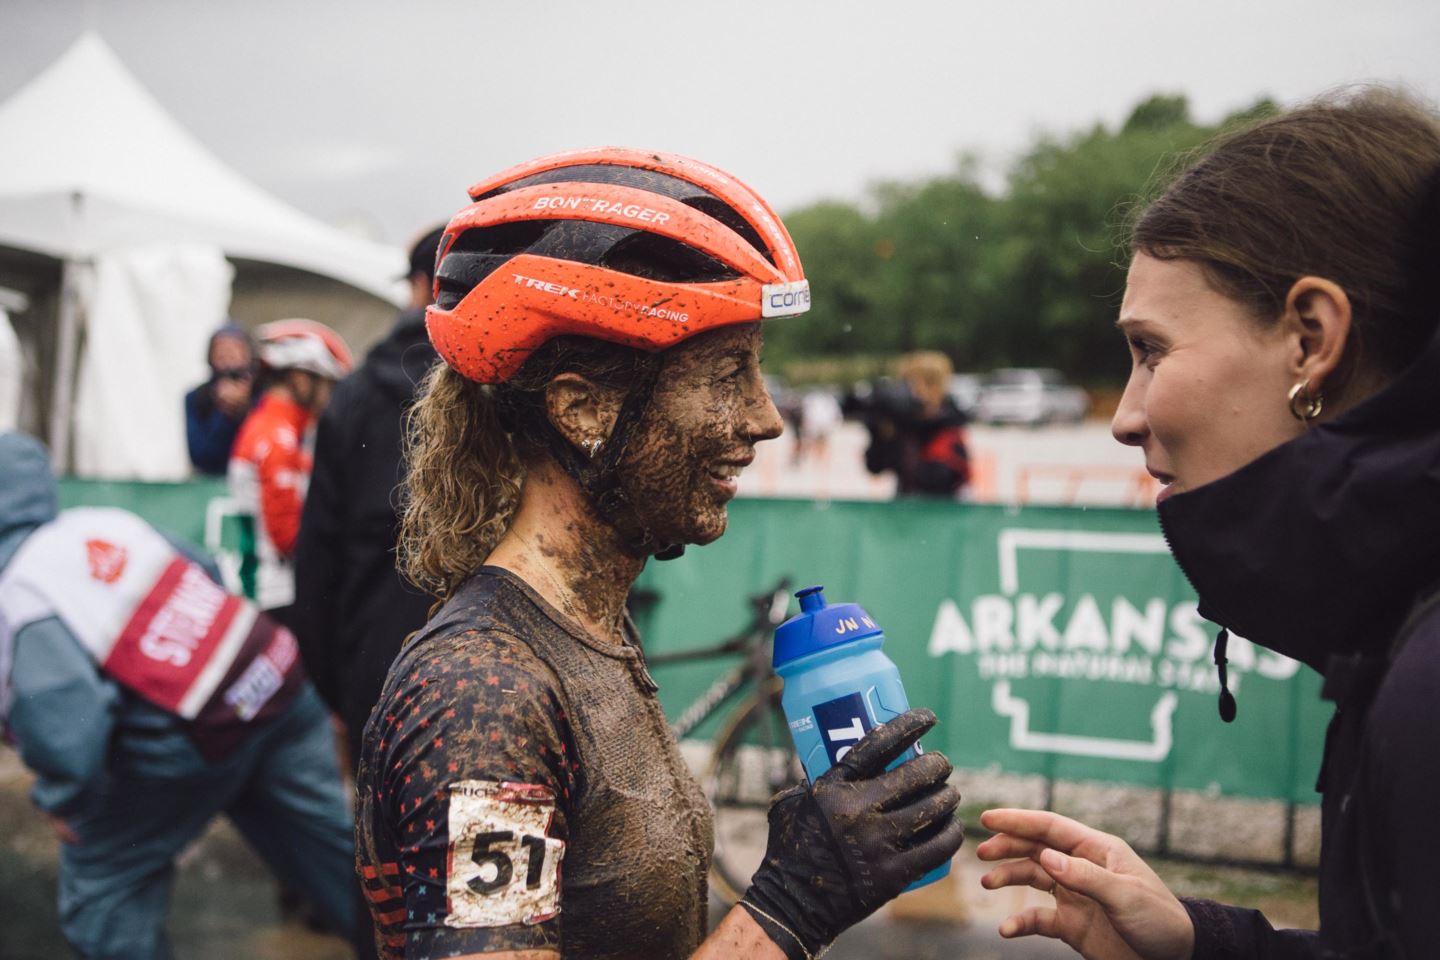 Jolanda Neff covered in mud after the World Cup race in Fayetteville.